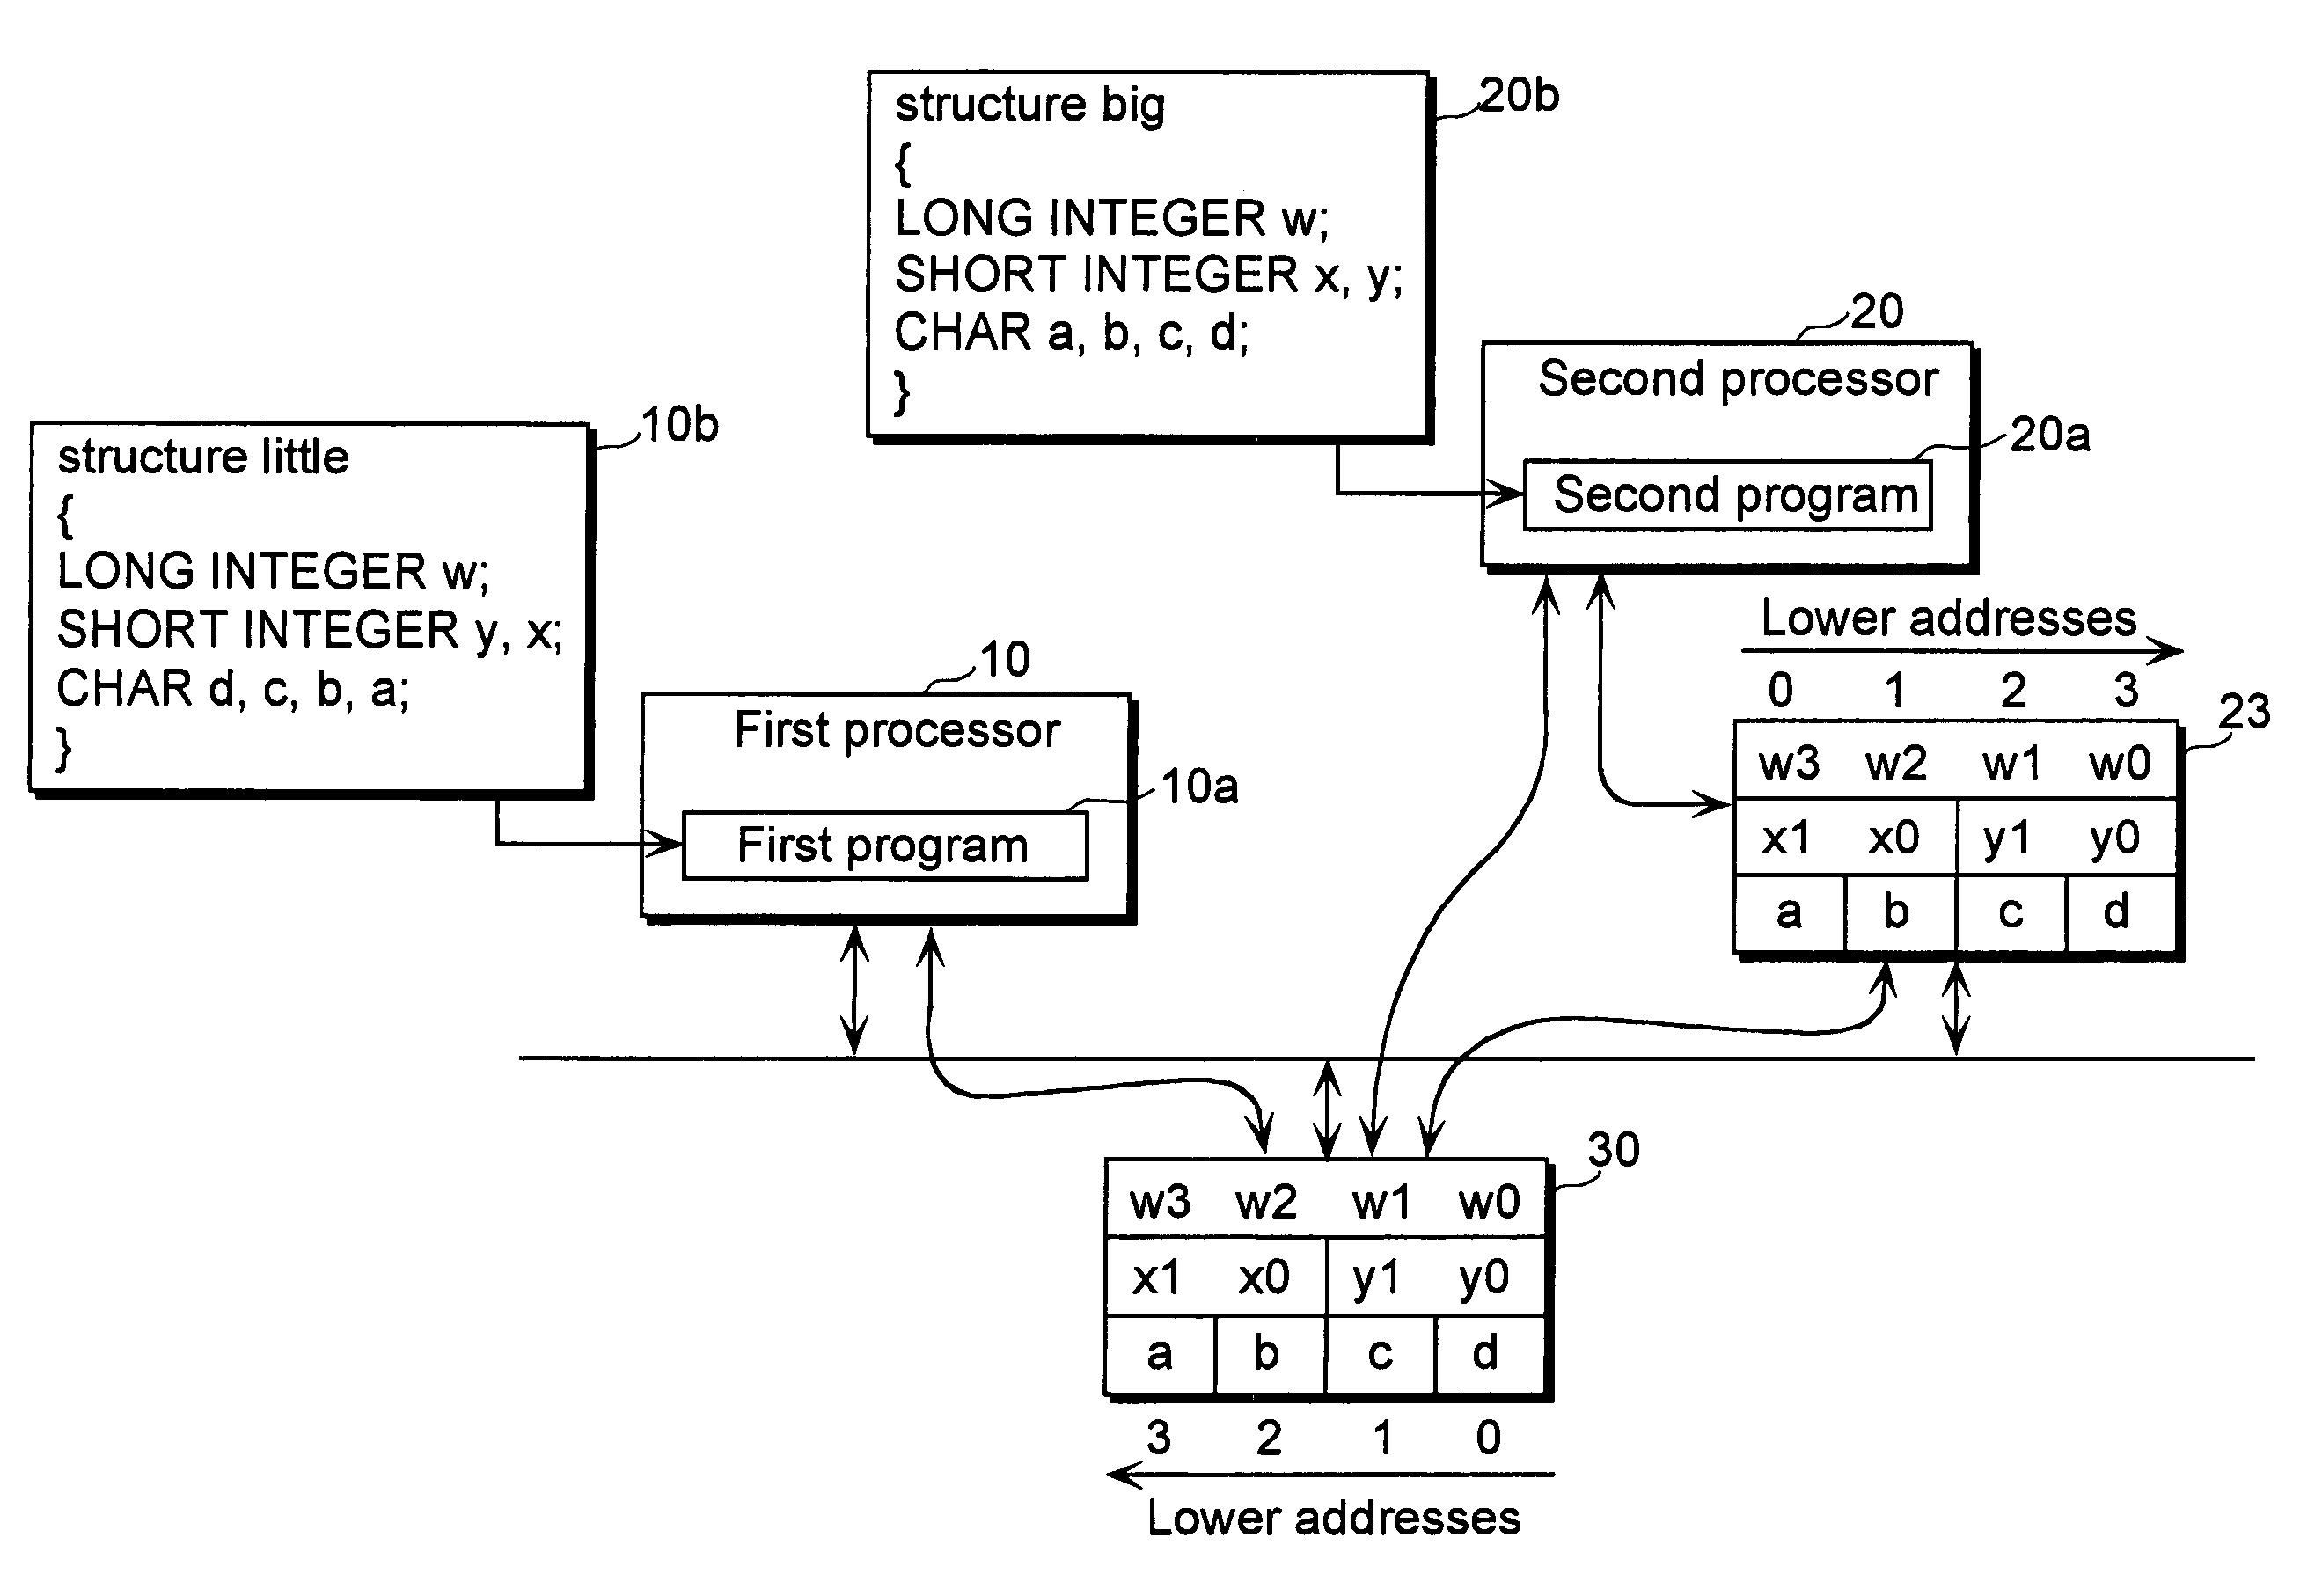 Data sharing apparatus and processor for sharing data between processors of different endianness